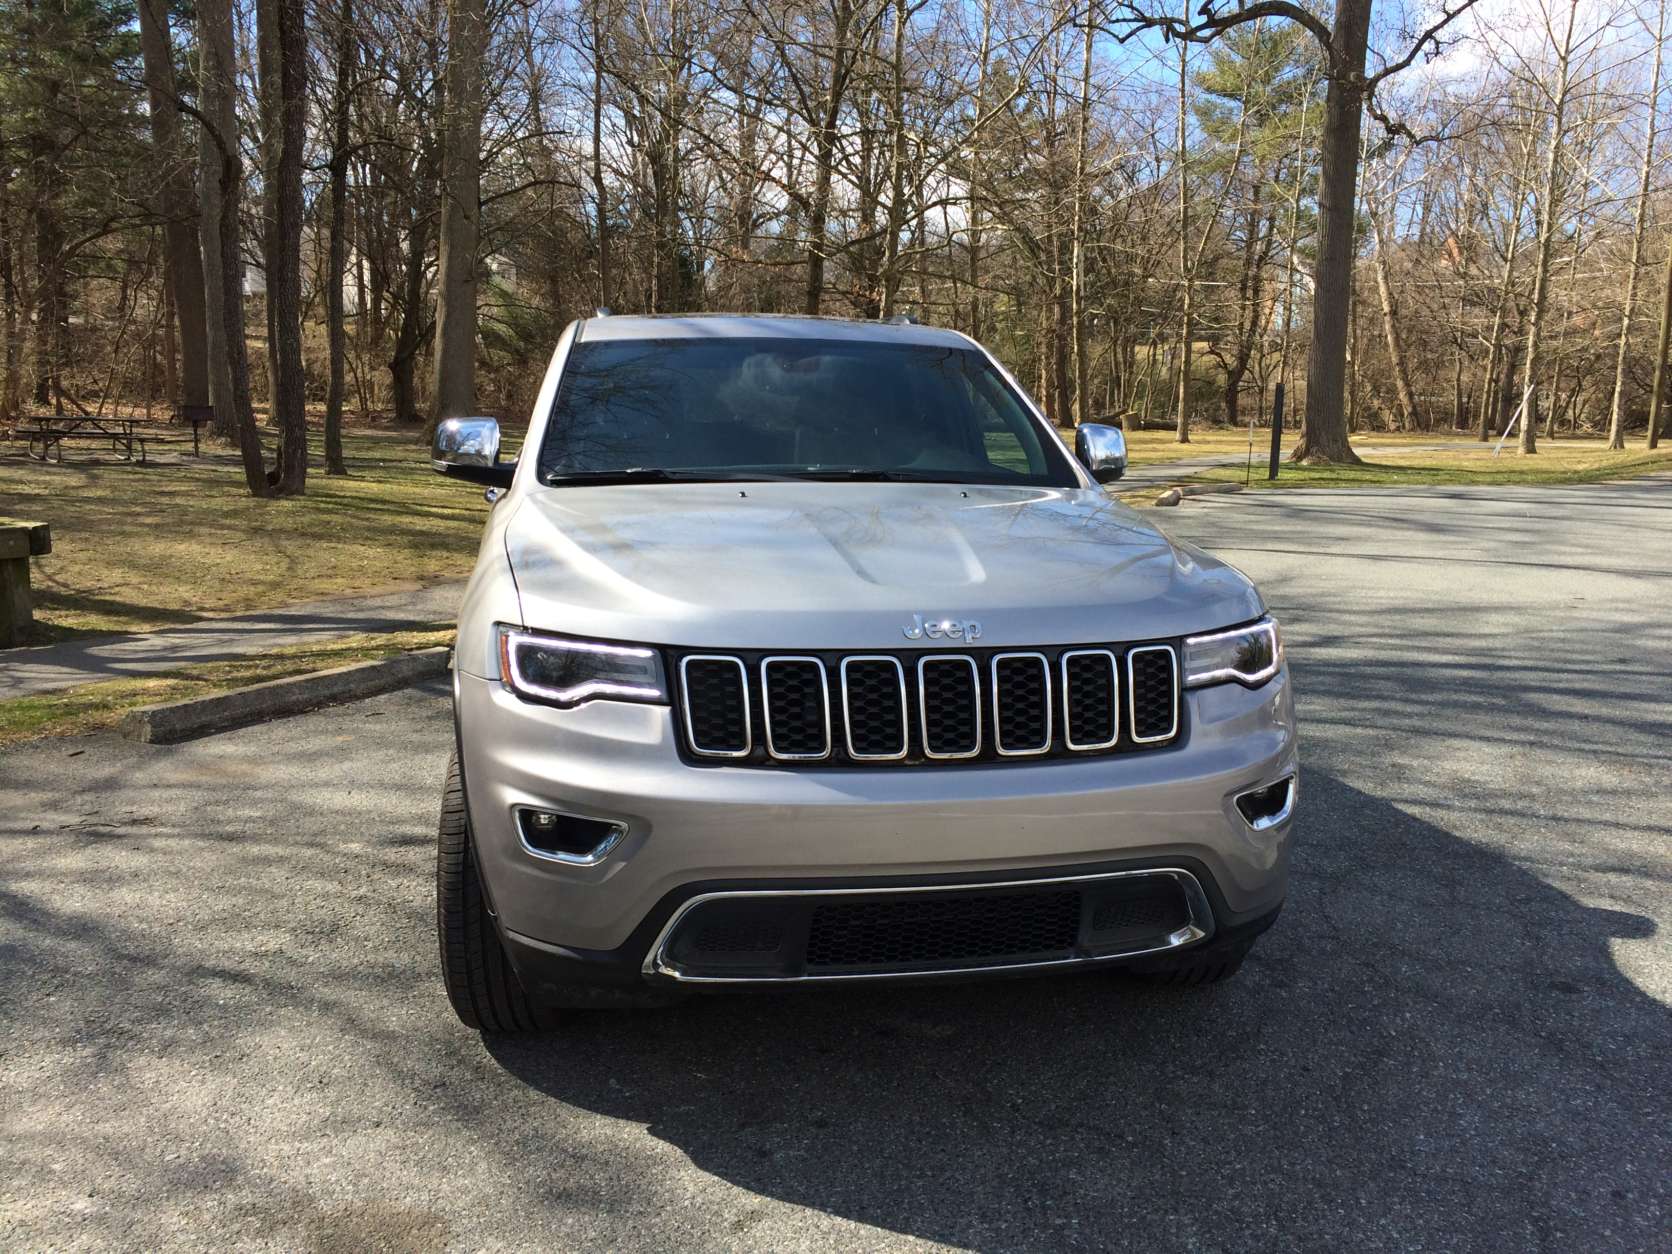 Up front, the 2017 Grand Cherokee has the trademark grill with those seven openings, but the headlight cluster looks more sleek and smaller than it did in the past. (WTOP/Mike Parris)